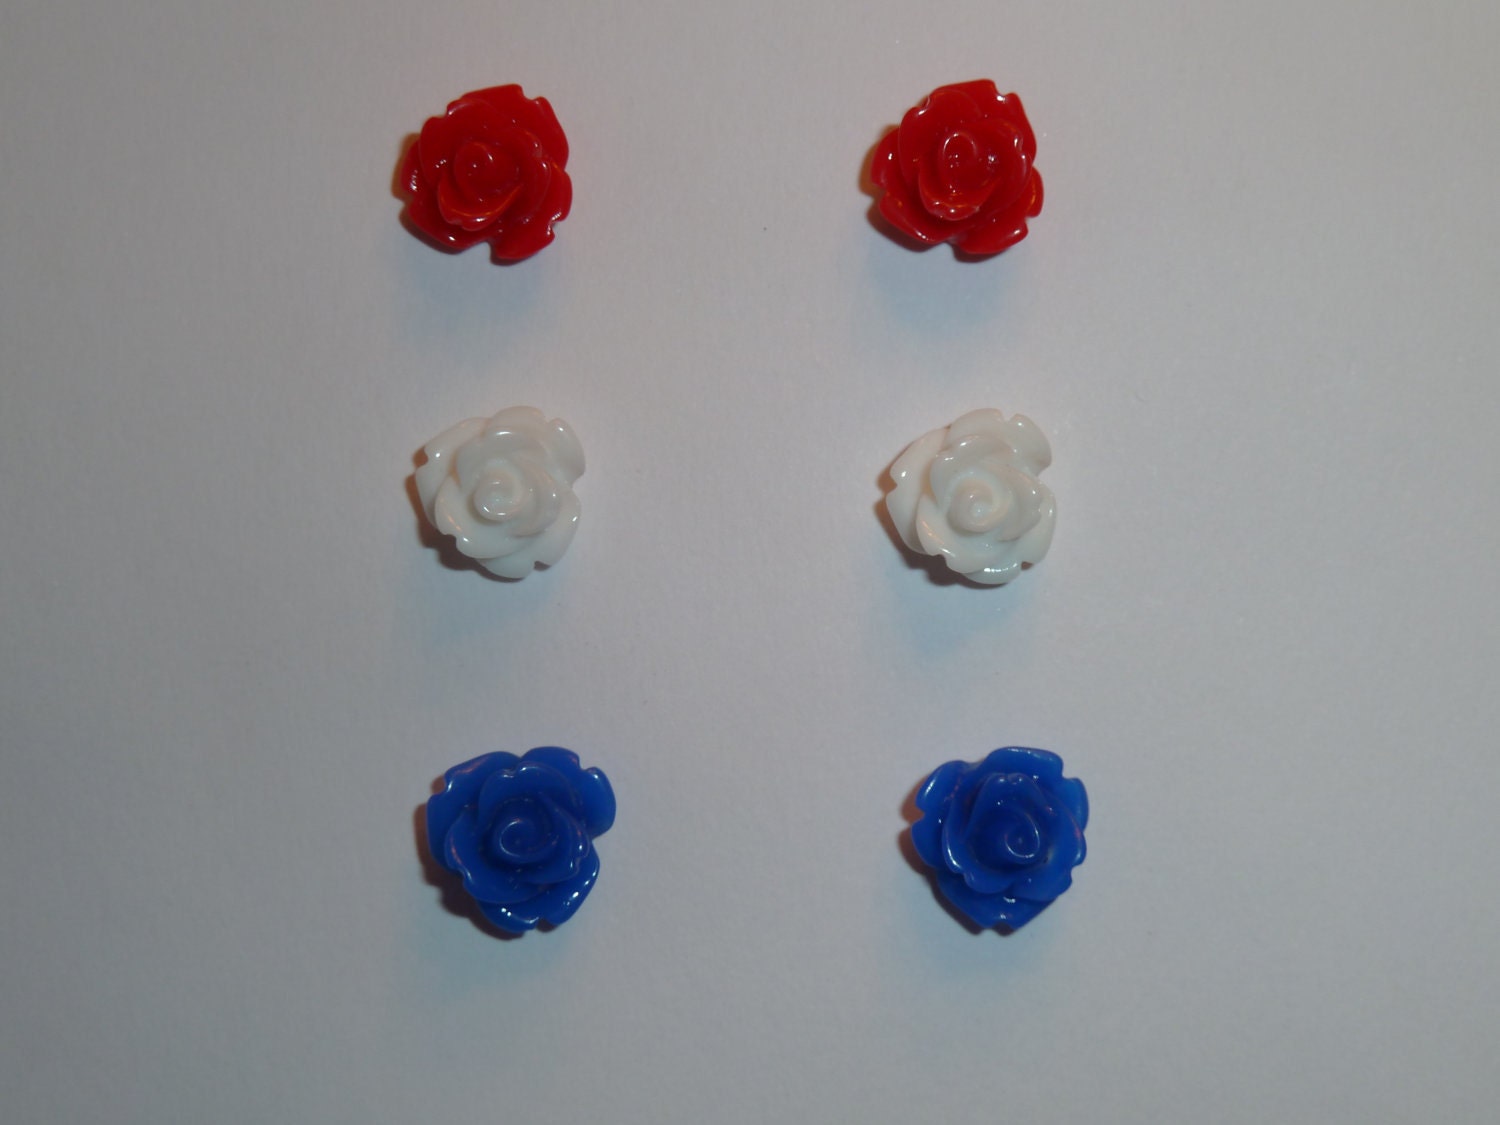 Red, White and Blue Rose Earring Trio